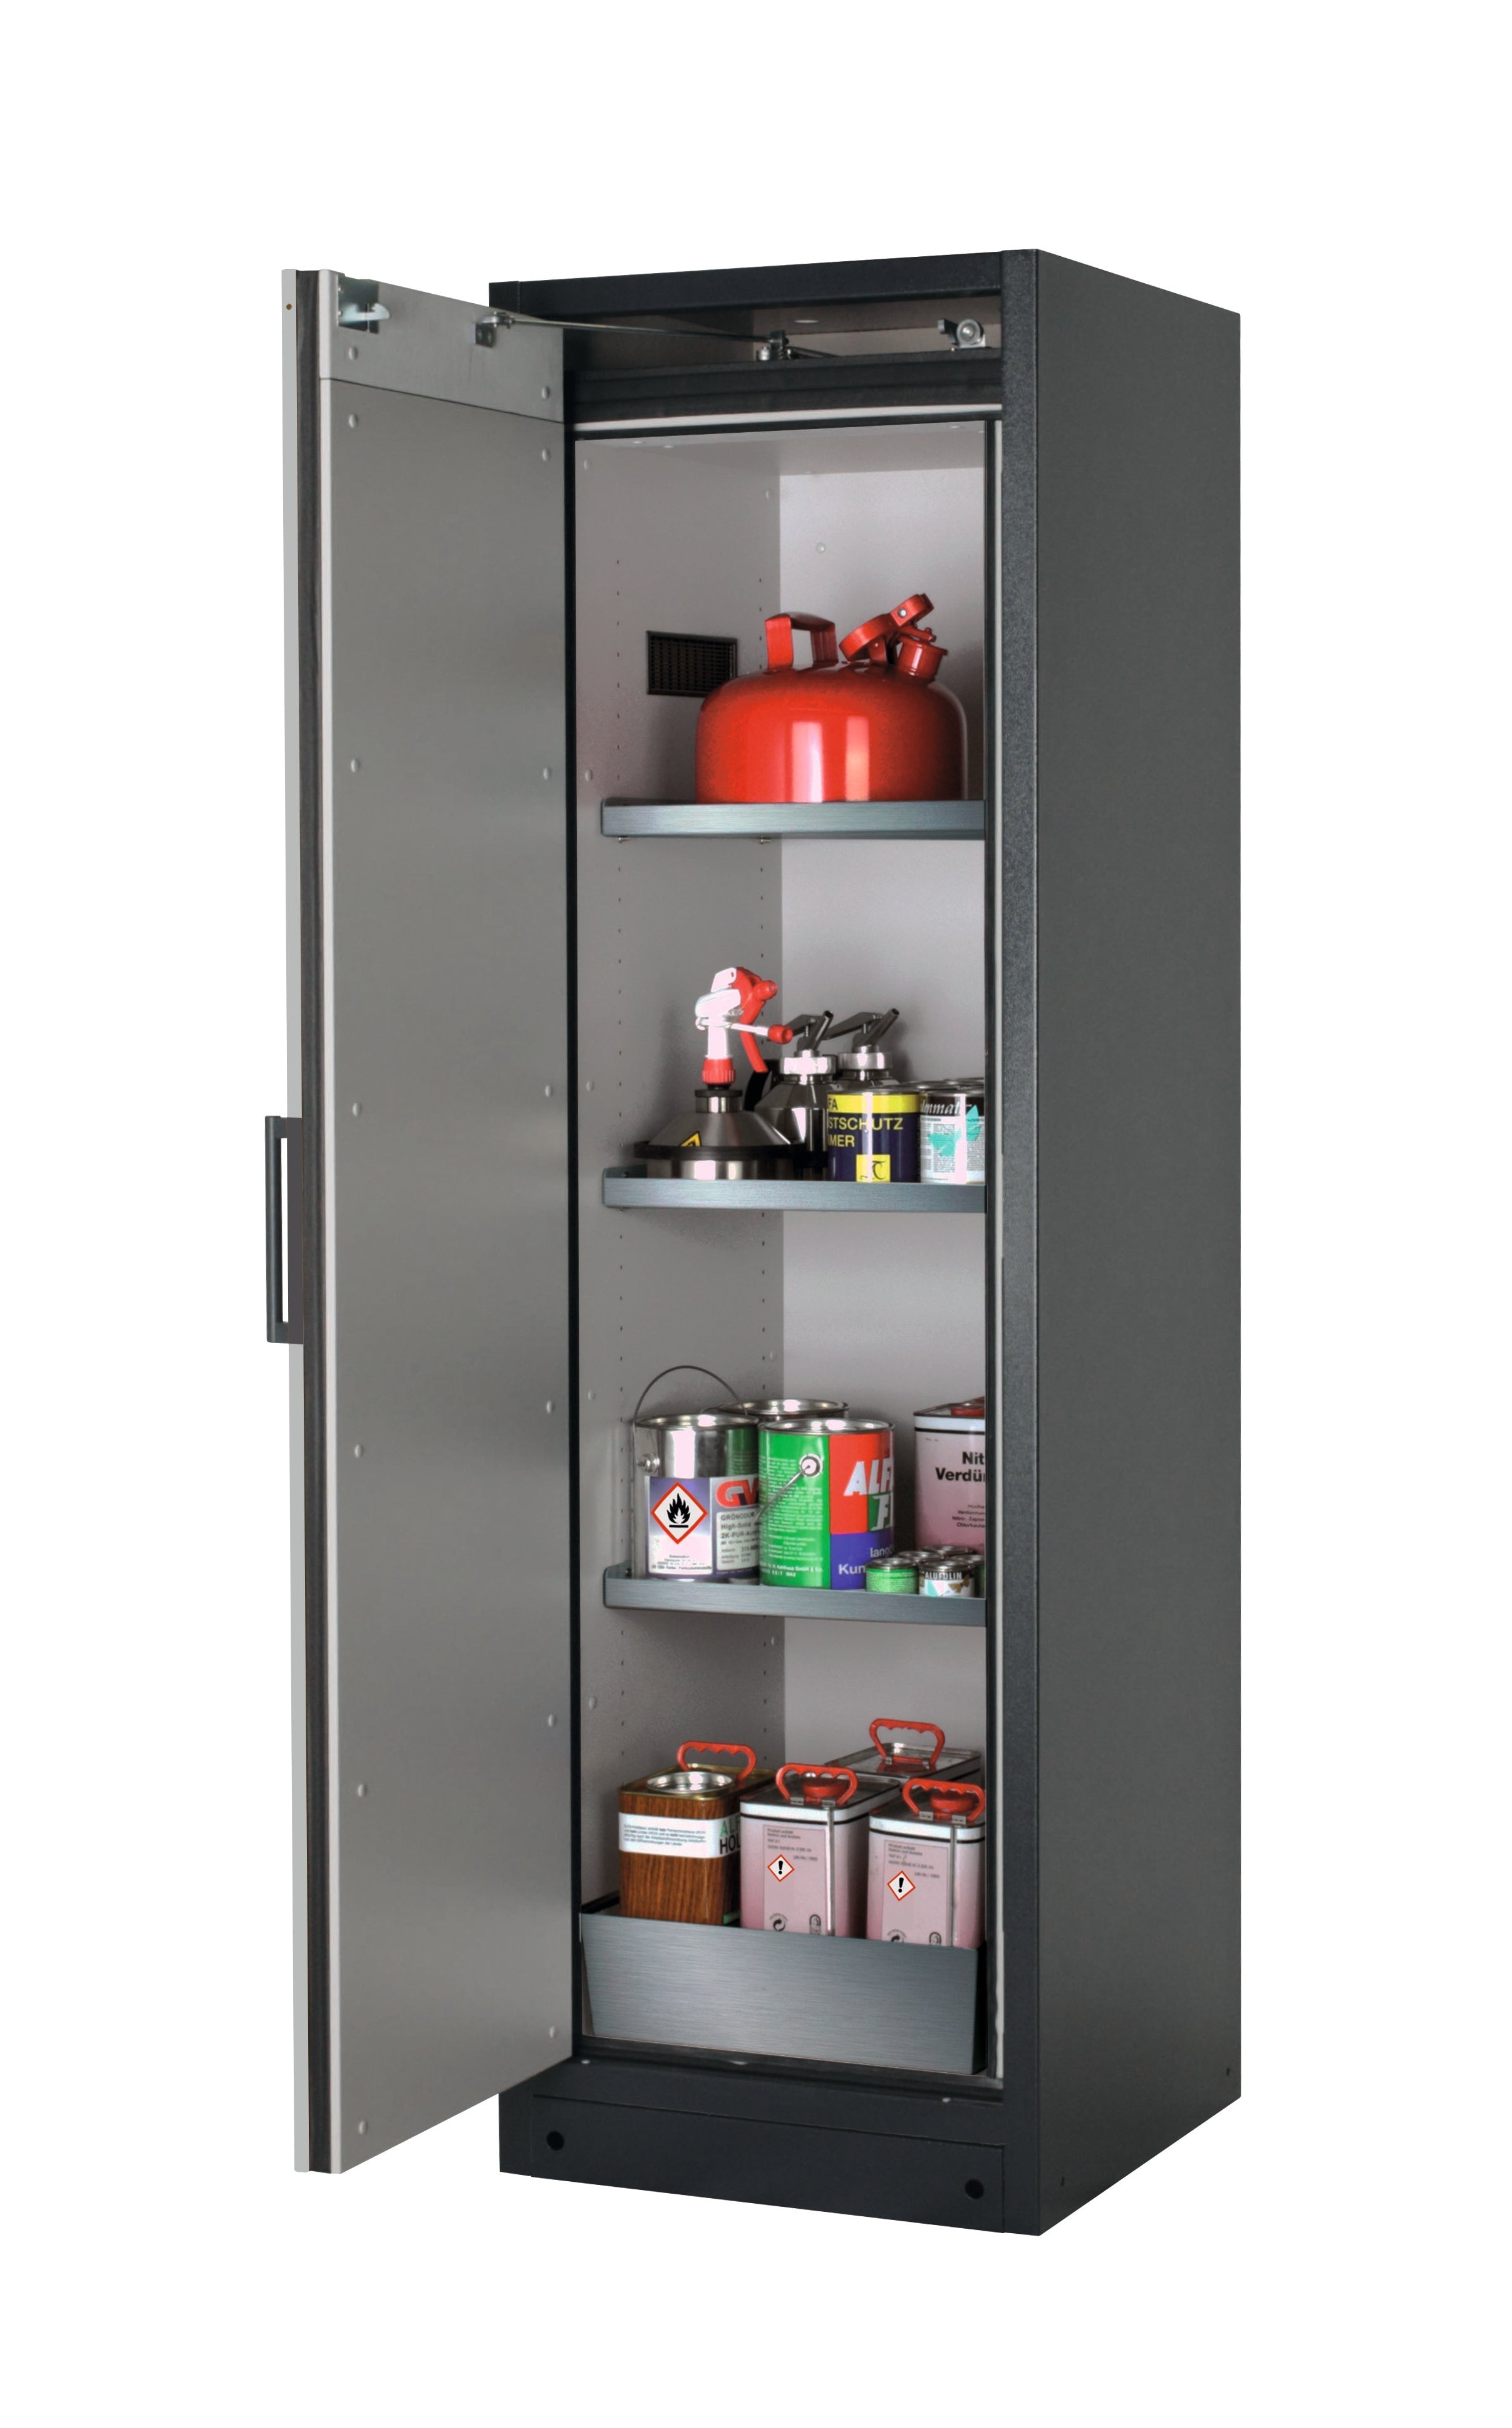 Type 90 safety storage cabinet Q-CLASSIC-90 model Q90.195.060 in pure white RAL 9010 with 3x shelf standard (stainless steel 1.4301),